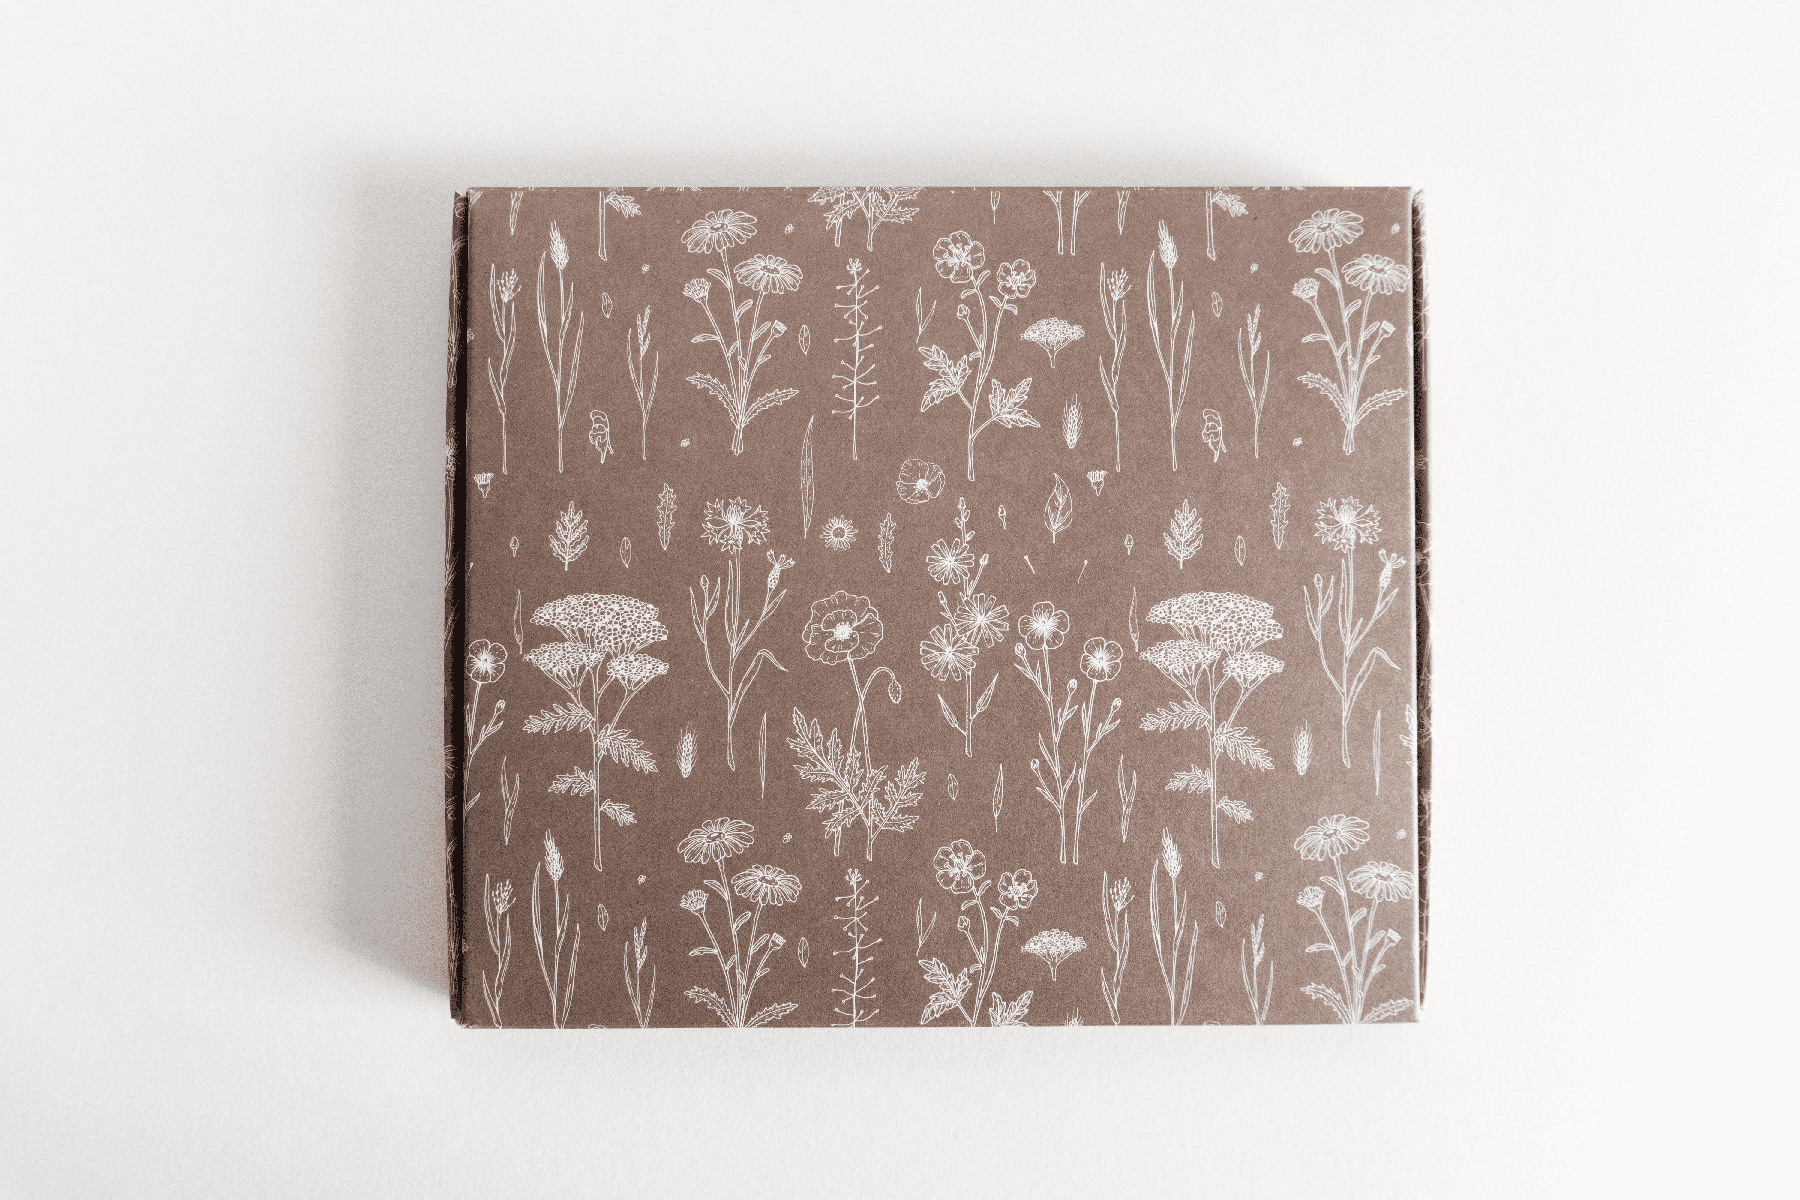 A brown SlimBox Wildflower 7" x 8" - Large notebook with a floral pattern on it from impack.co.